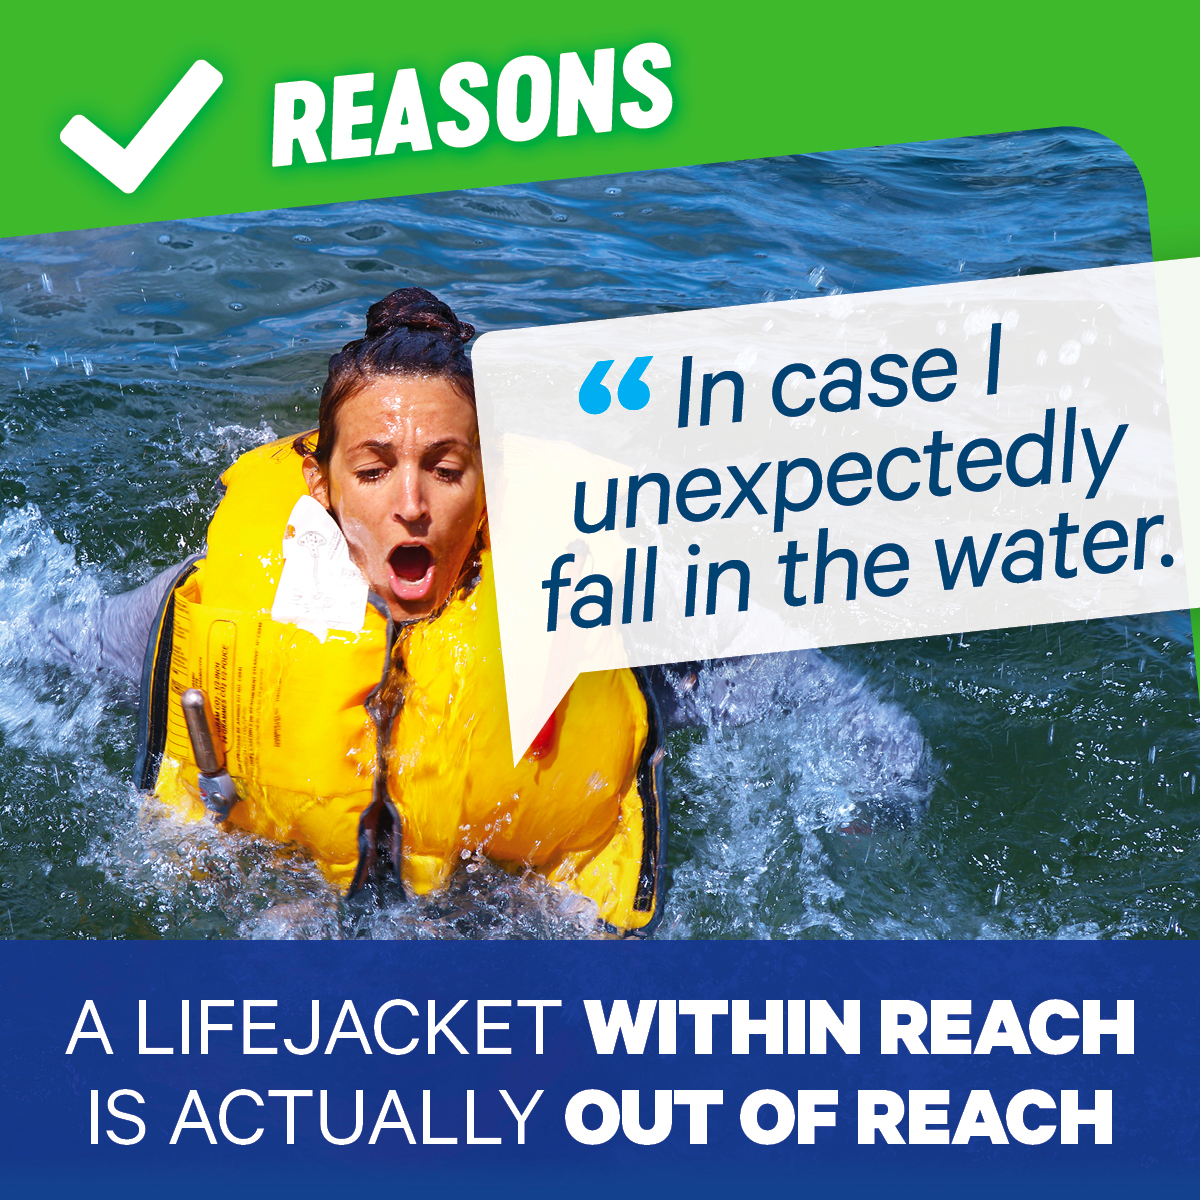 Expect the unexpected this boating season & always wear your #lifejacket every time you head out on the water.  That way it will always be #WithinReach when you need it.

Visit enjoyboating.ca to learn more  about lifejackets.

#KnowBeforeYouGo #BePrepared